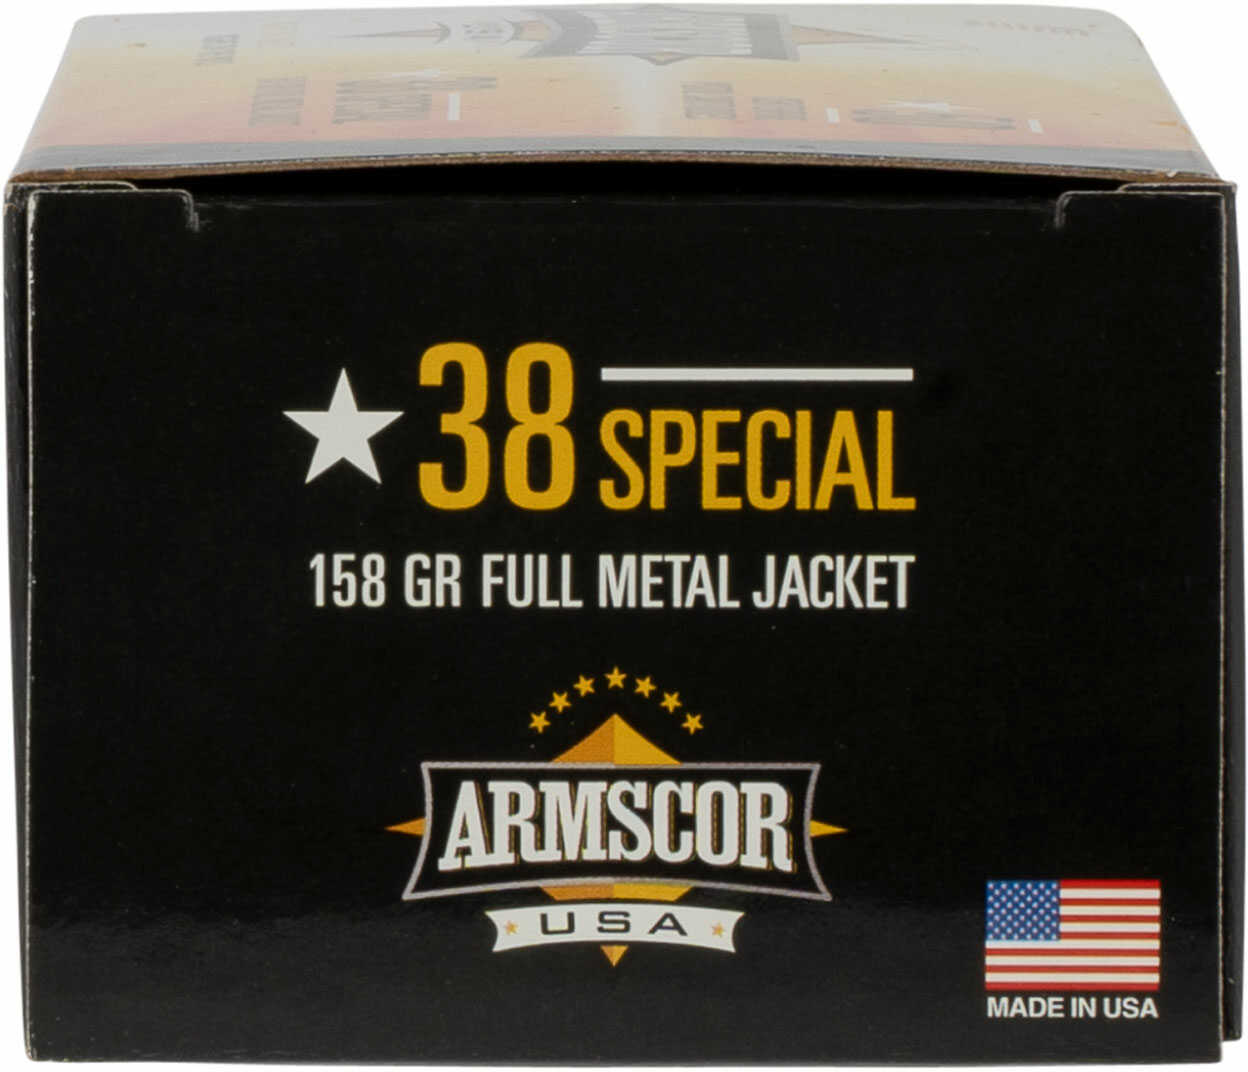 38 Special 158 Grain Full Metal Jacket 50 Rounds Armscor Ammunition